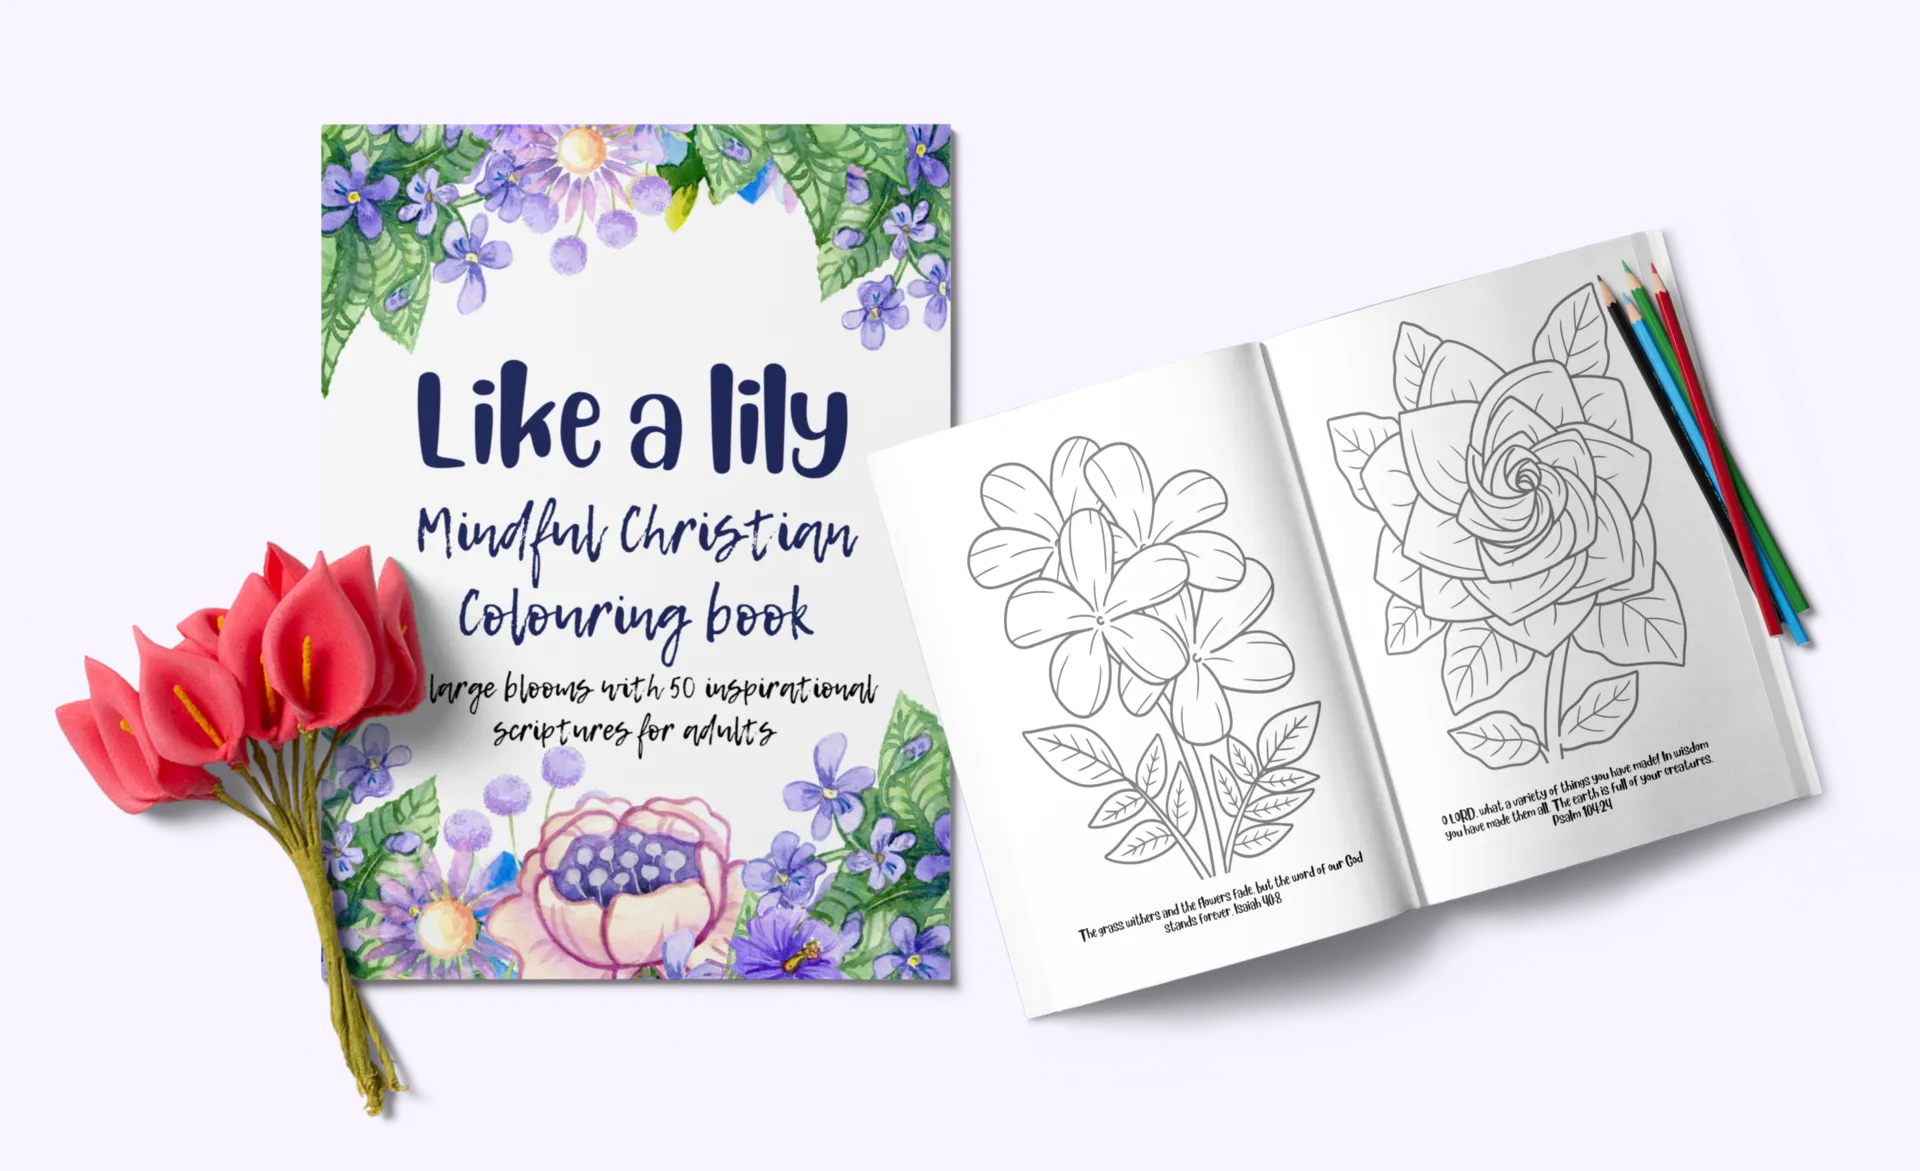 Like a lily: Mindful Christian Colouring book for adults and children